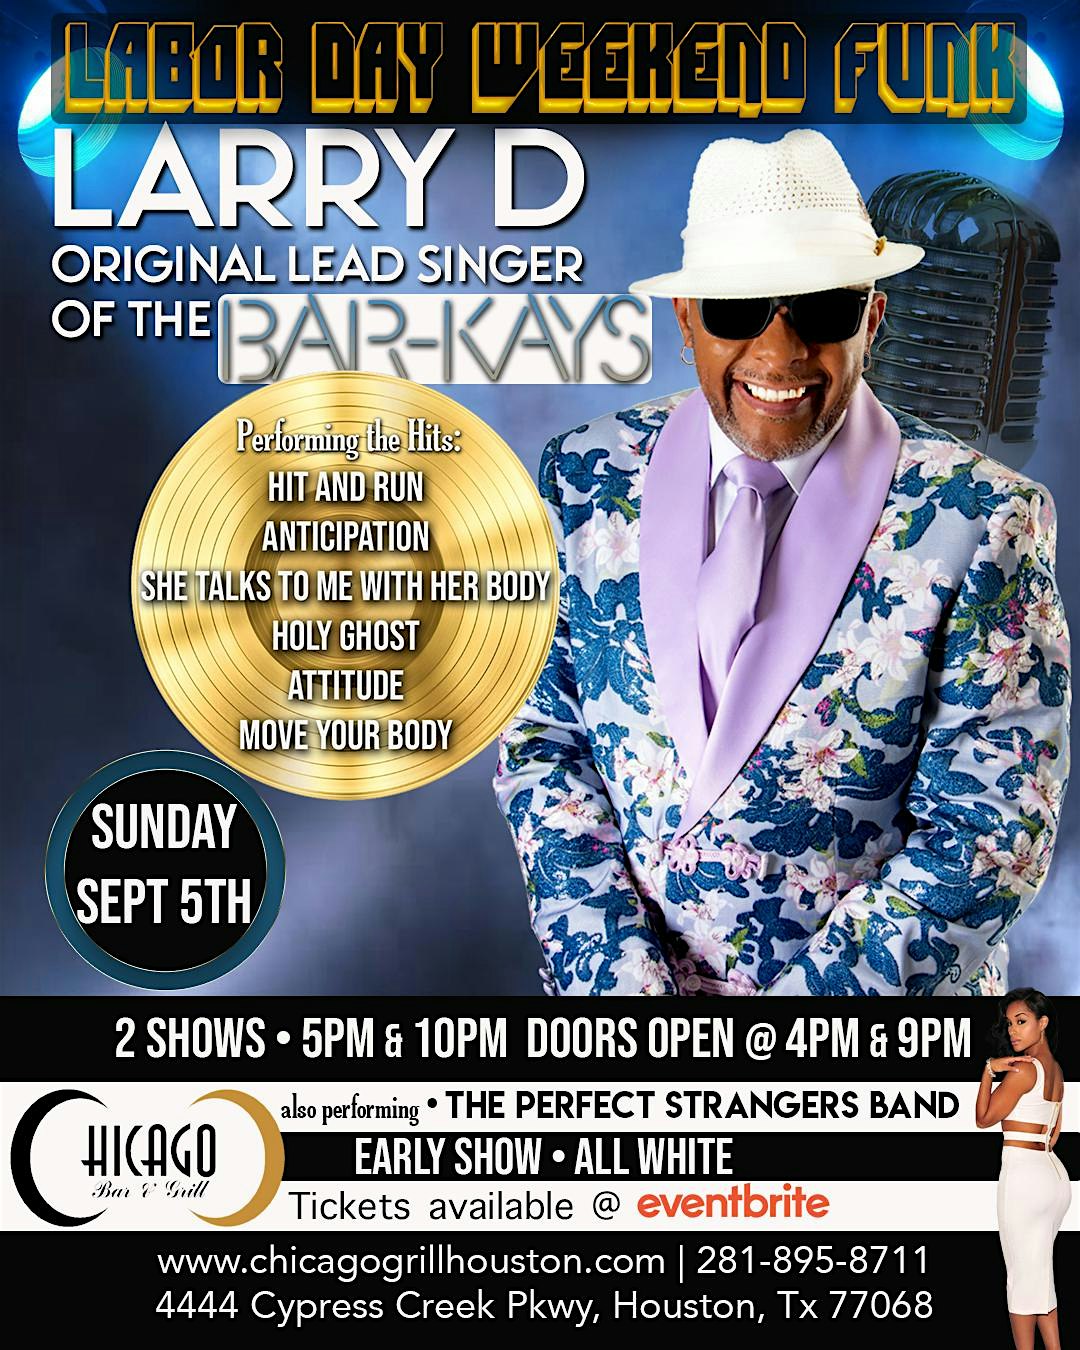 Larry "D" Original Lead Singer of The Bar-Kays Review- LATE  SHOW 10 PM.